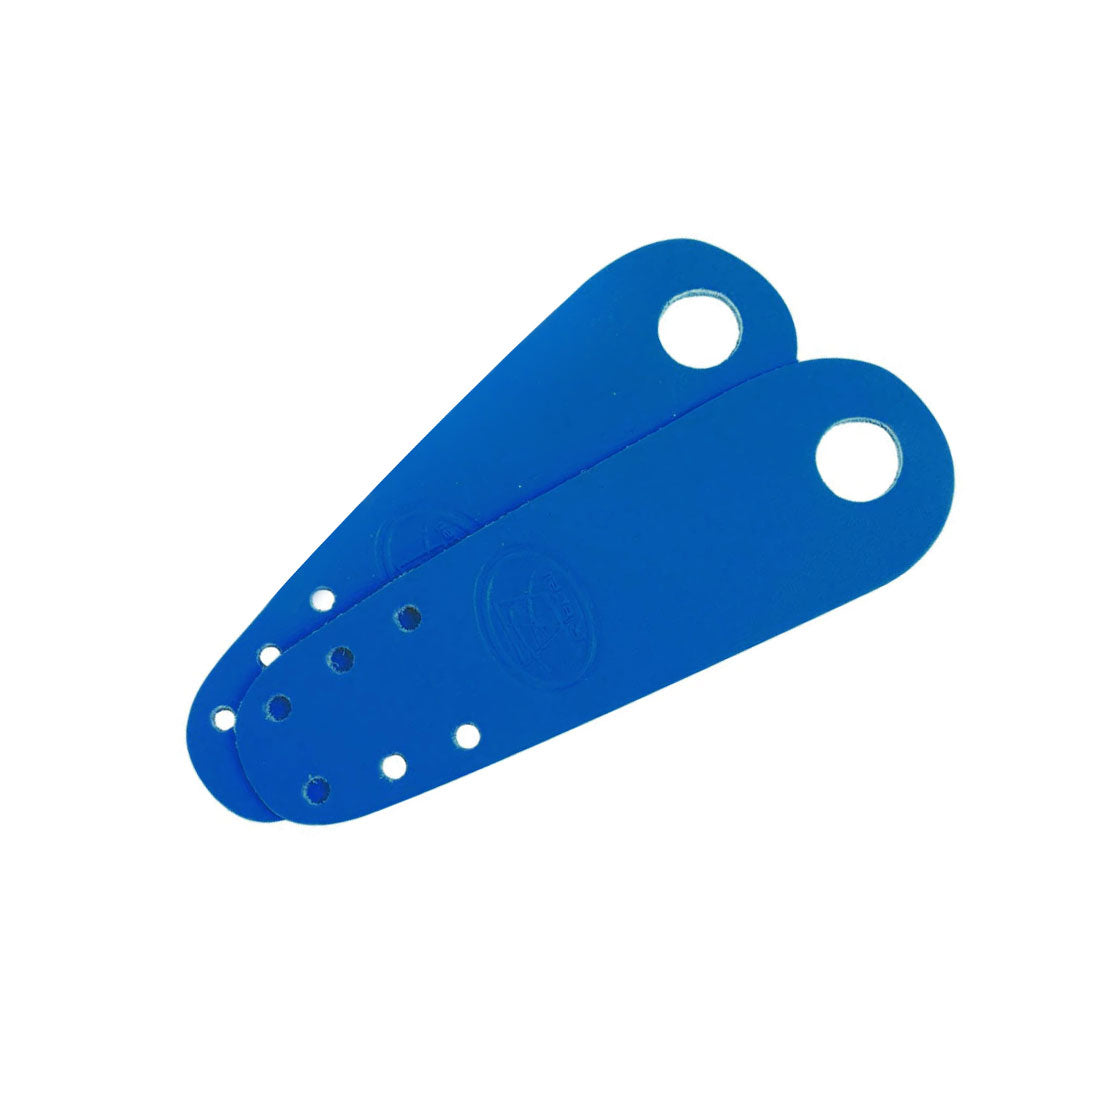 Riedell Flat Toe Guards 2pk - Leather Royal Blue Roller Skate Hardware and Parts